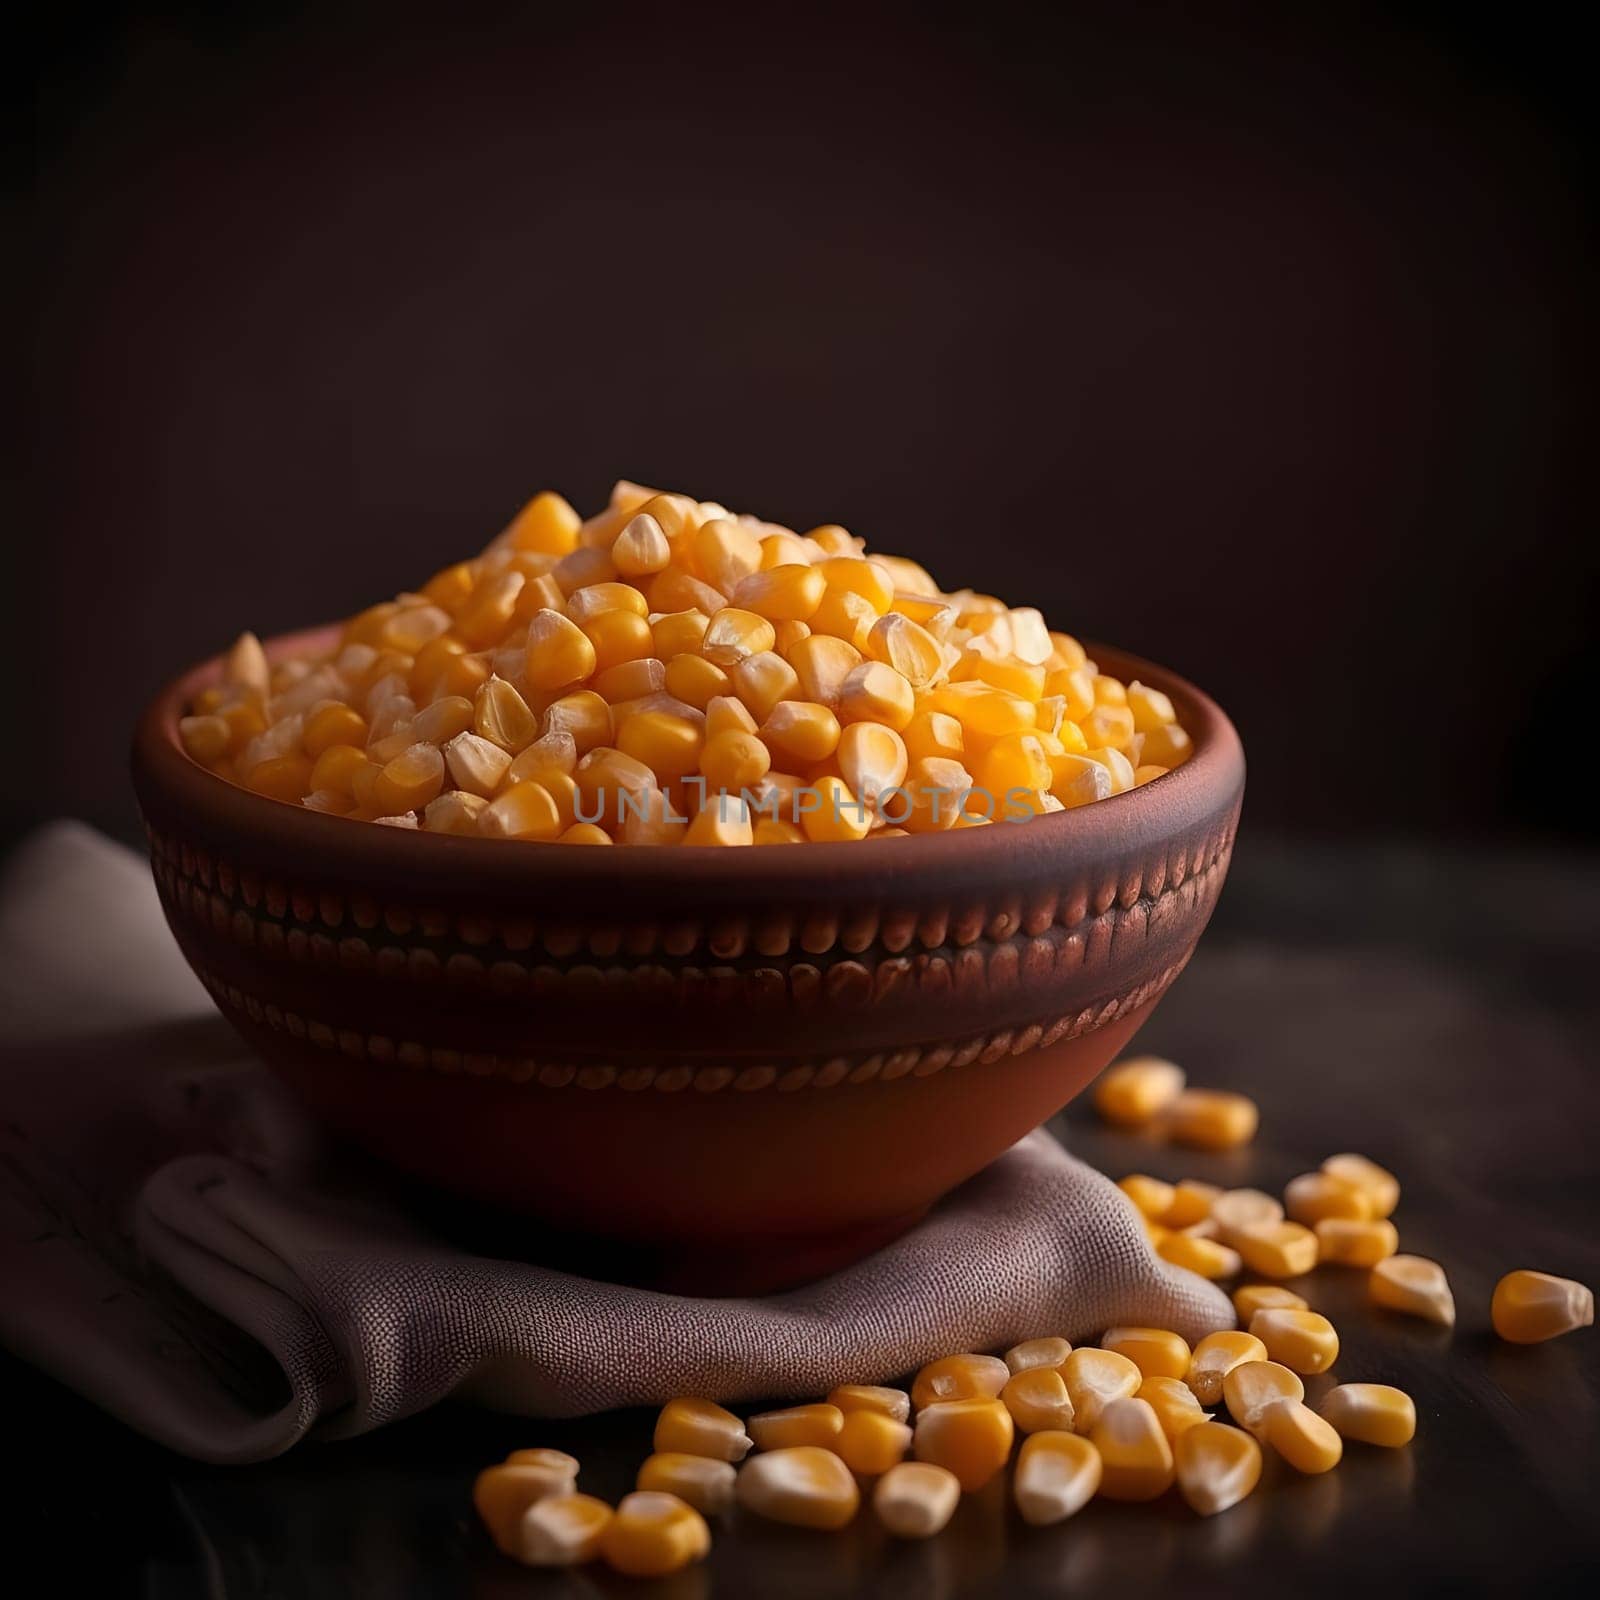 Small bowl filled with corn kernels, black background. Corn as a dish of thanksgiving for the harvest. An atmosphere of joy and celebration.